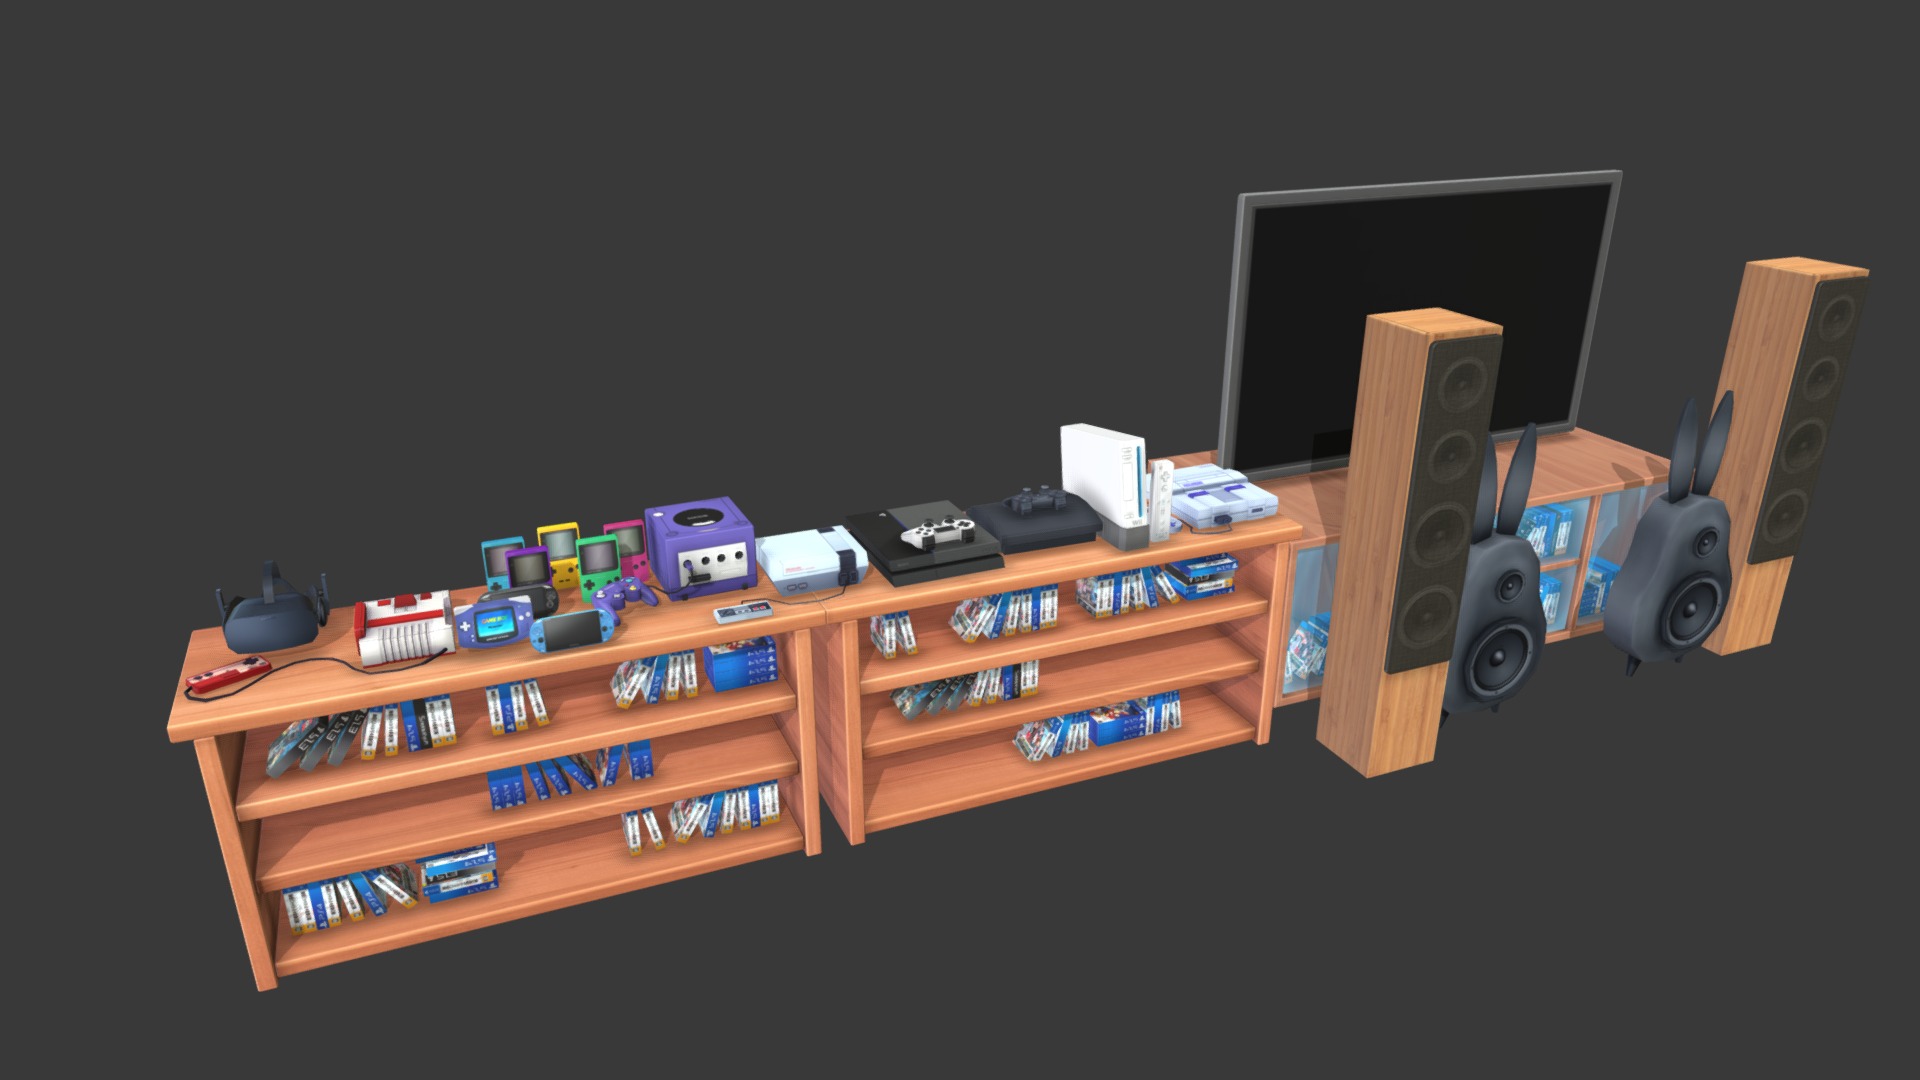 3D model Bitbot-Game Asset #StoreFurnitureChallenge - This is a 3D model of the Bitbot-Game Asset #StoreFurnitureChallenge. The 3D model is about a desk with a computer and speakers.